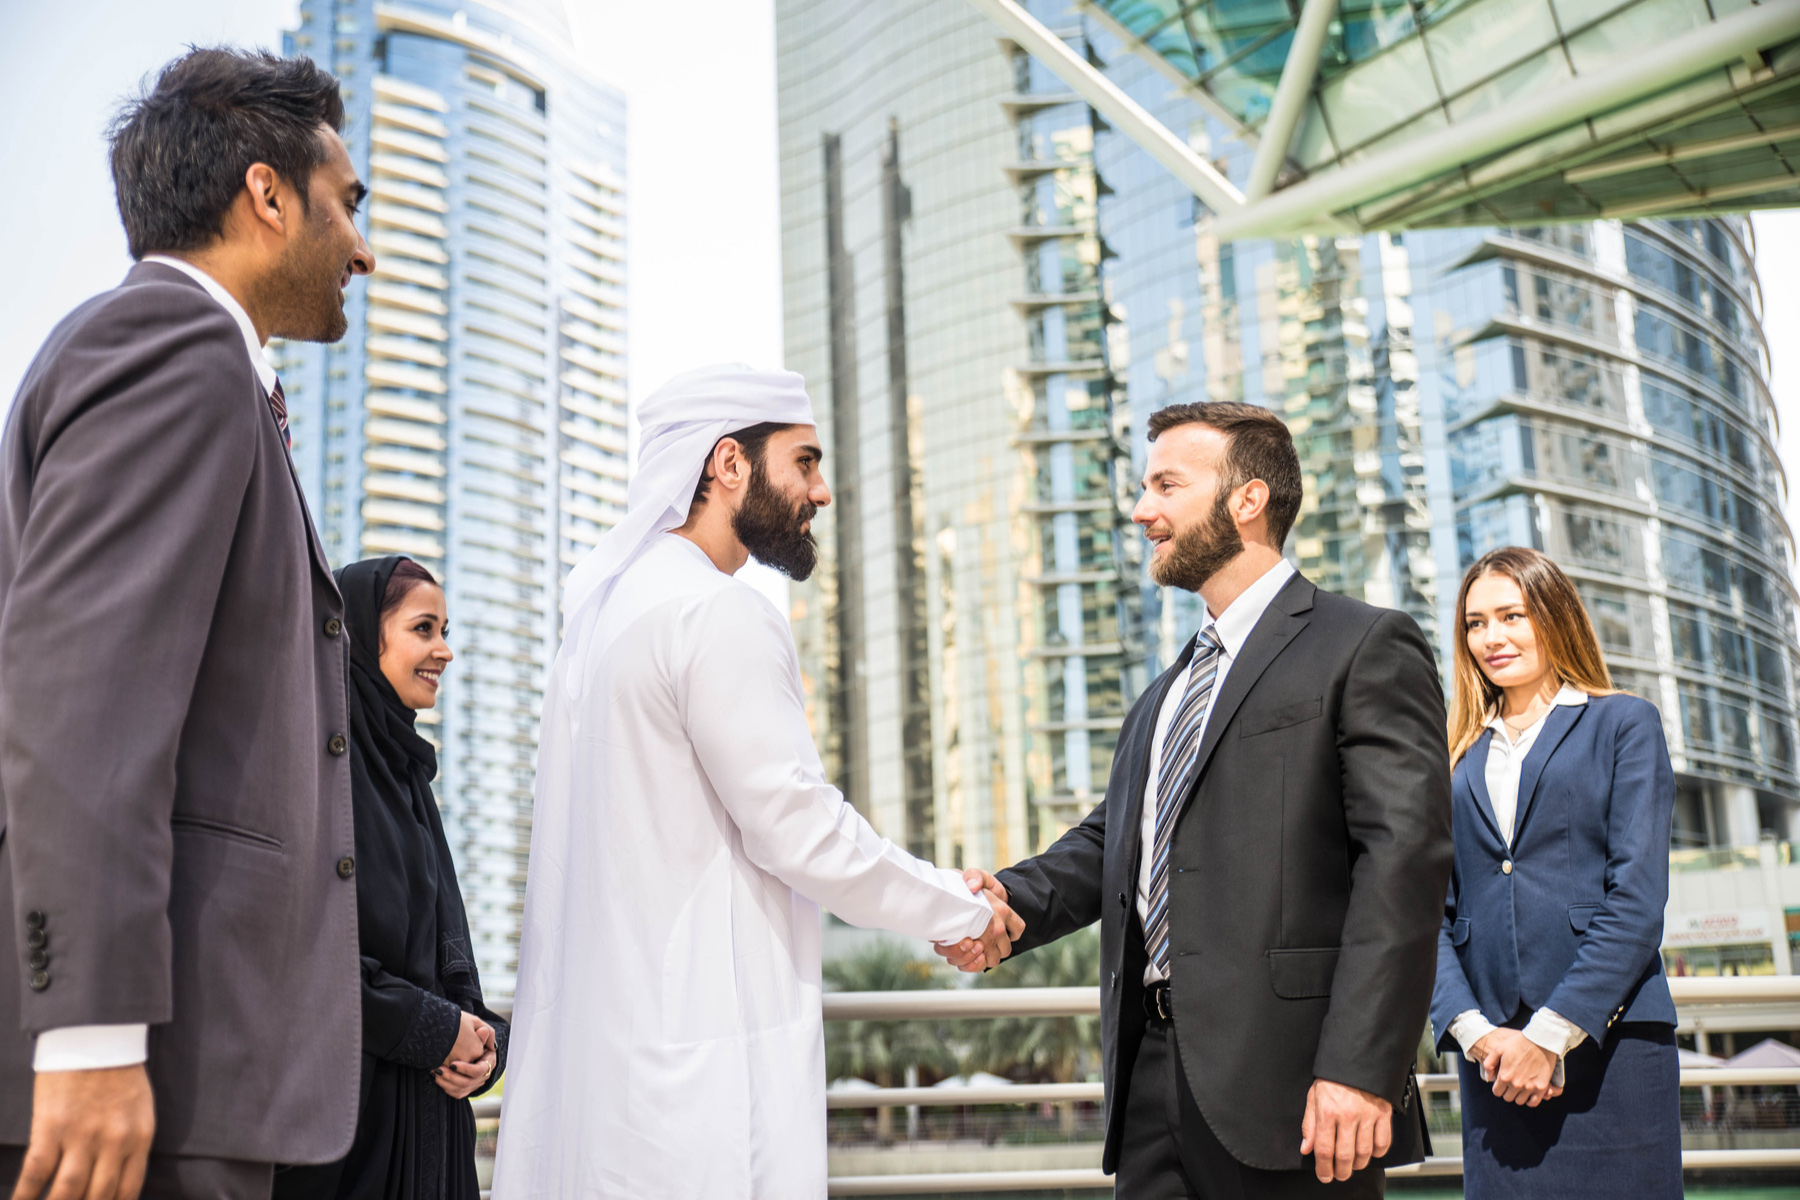 Creating a Business in the UAE